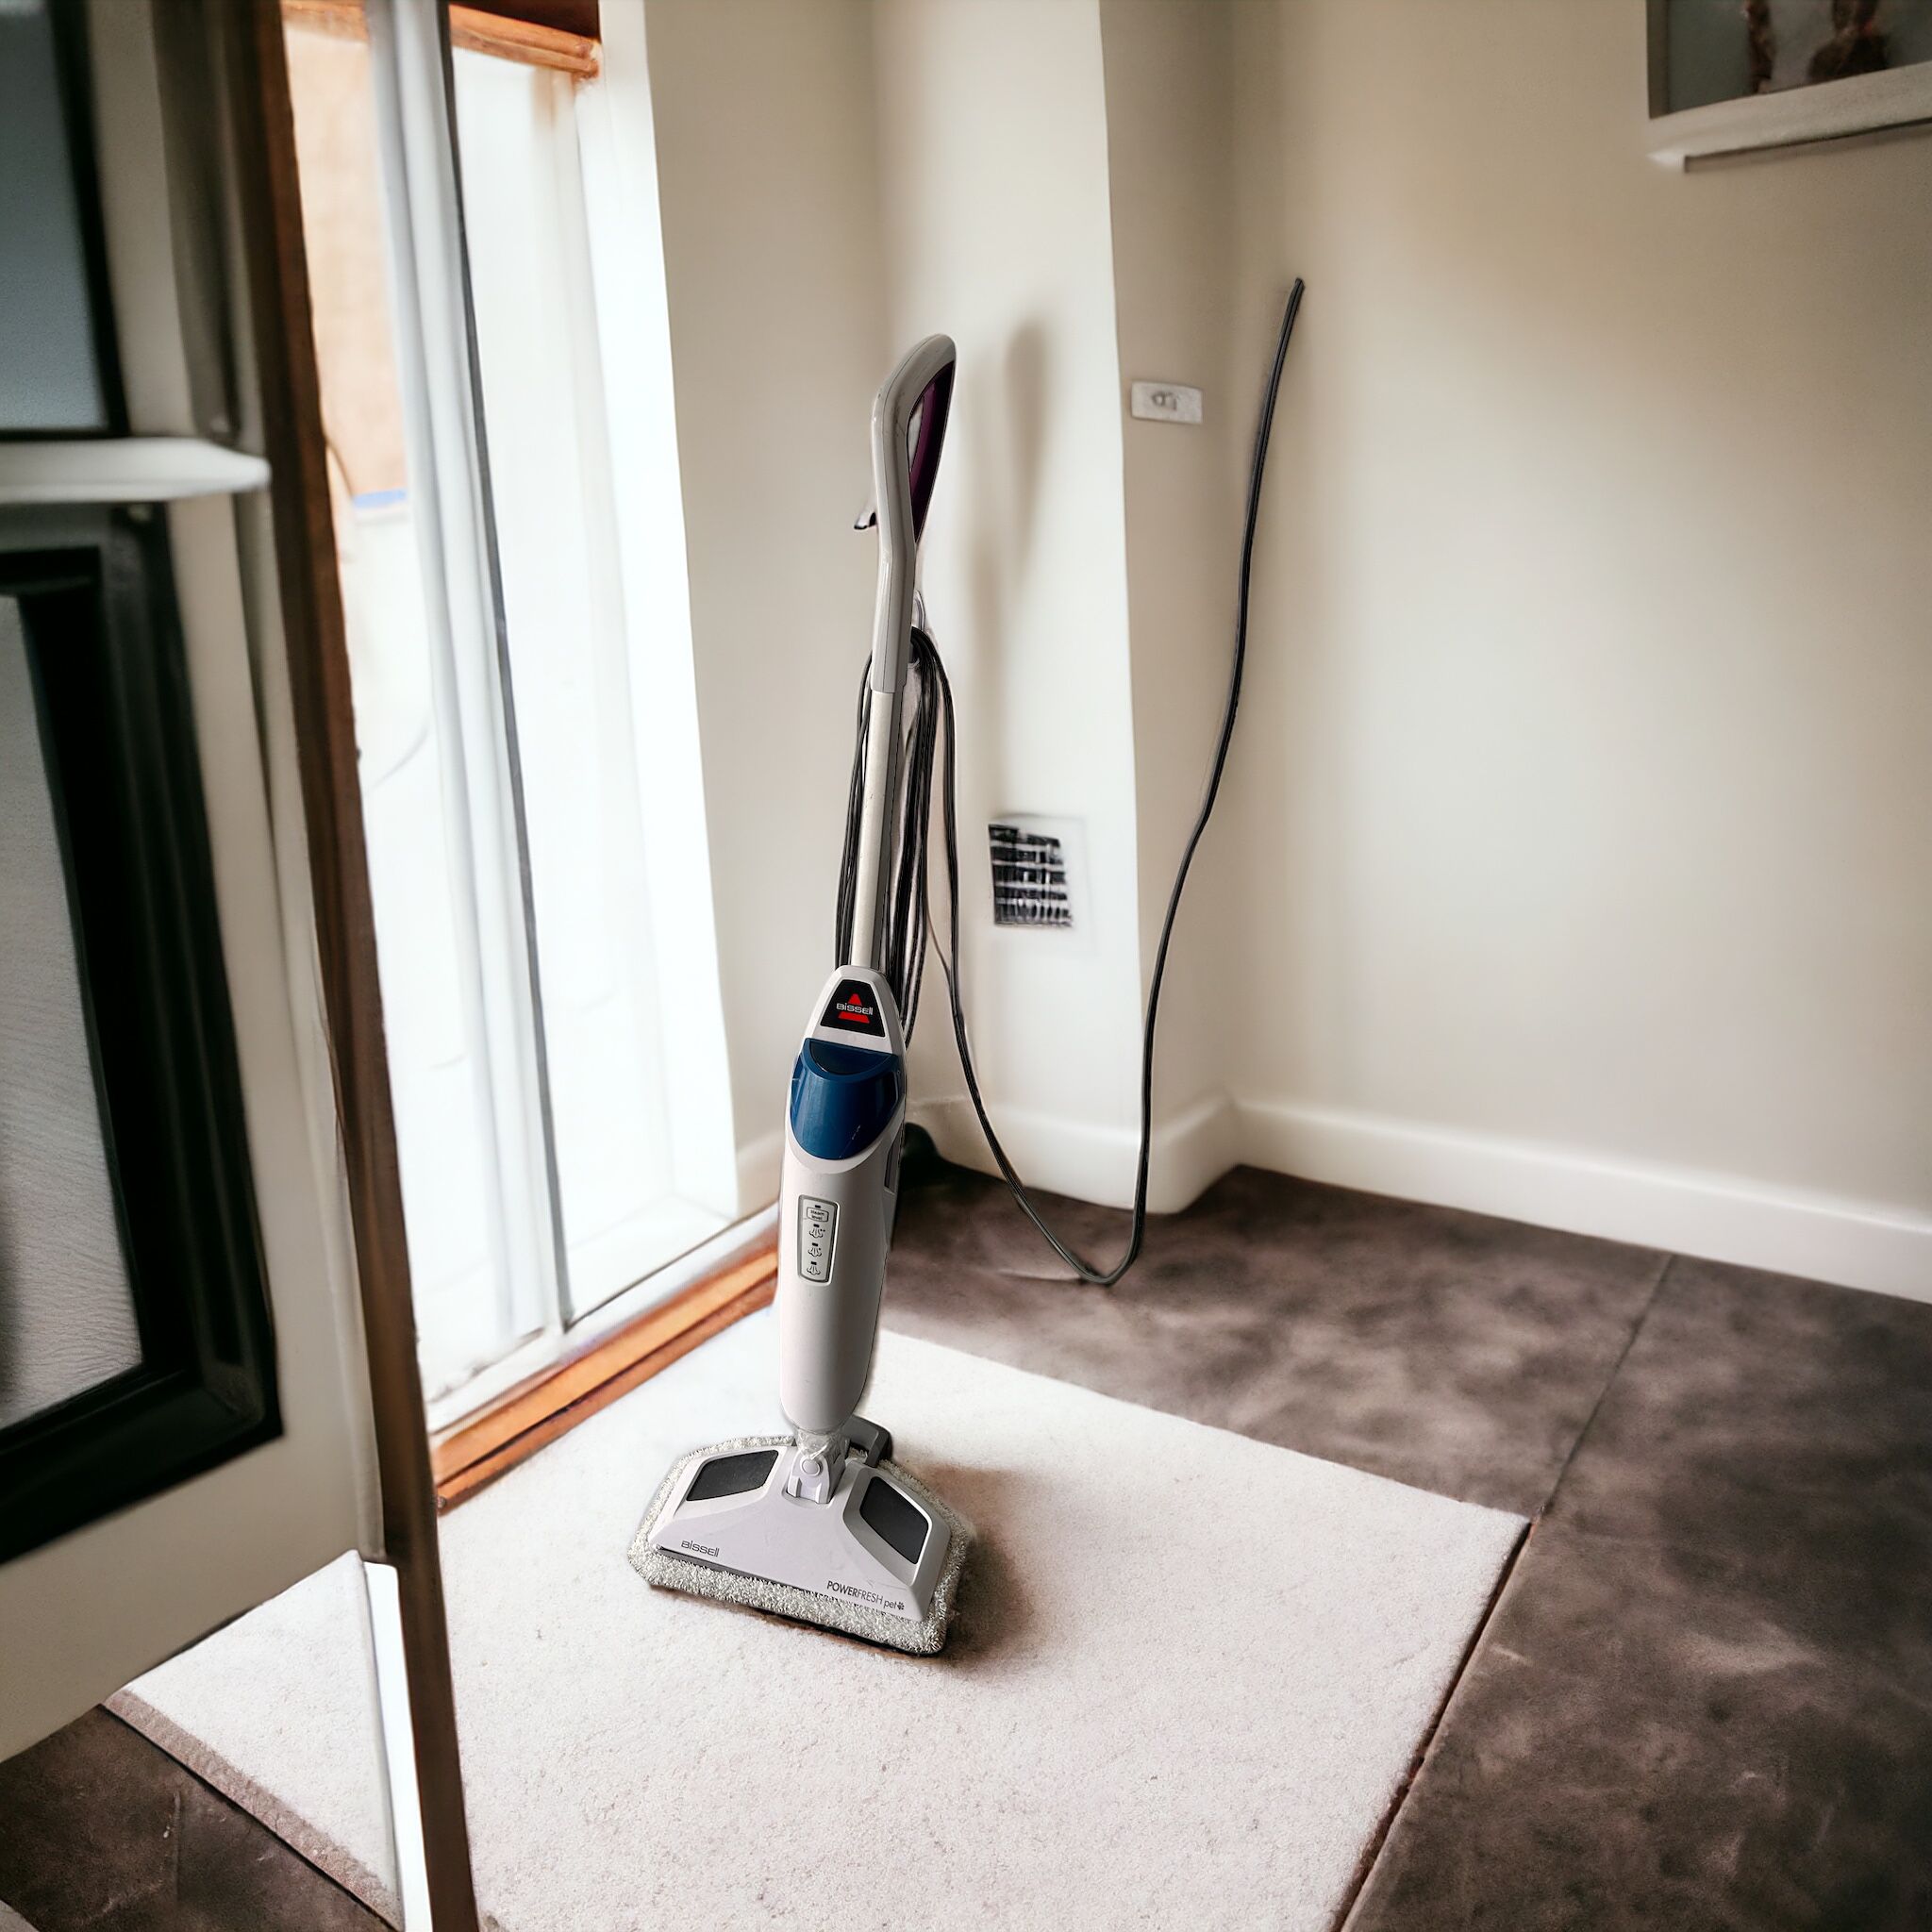 $40 for (1) BISSELL PowerFresh Pet 23-ft Steam Mop